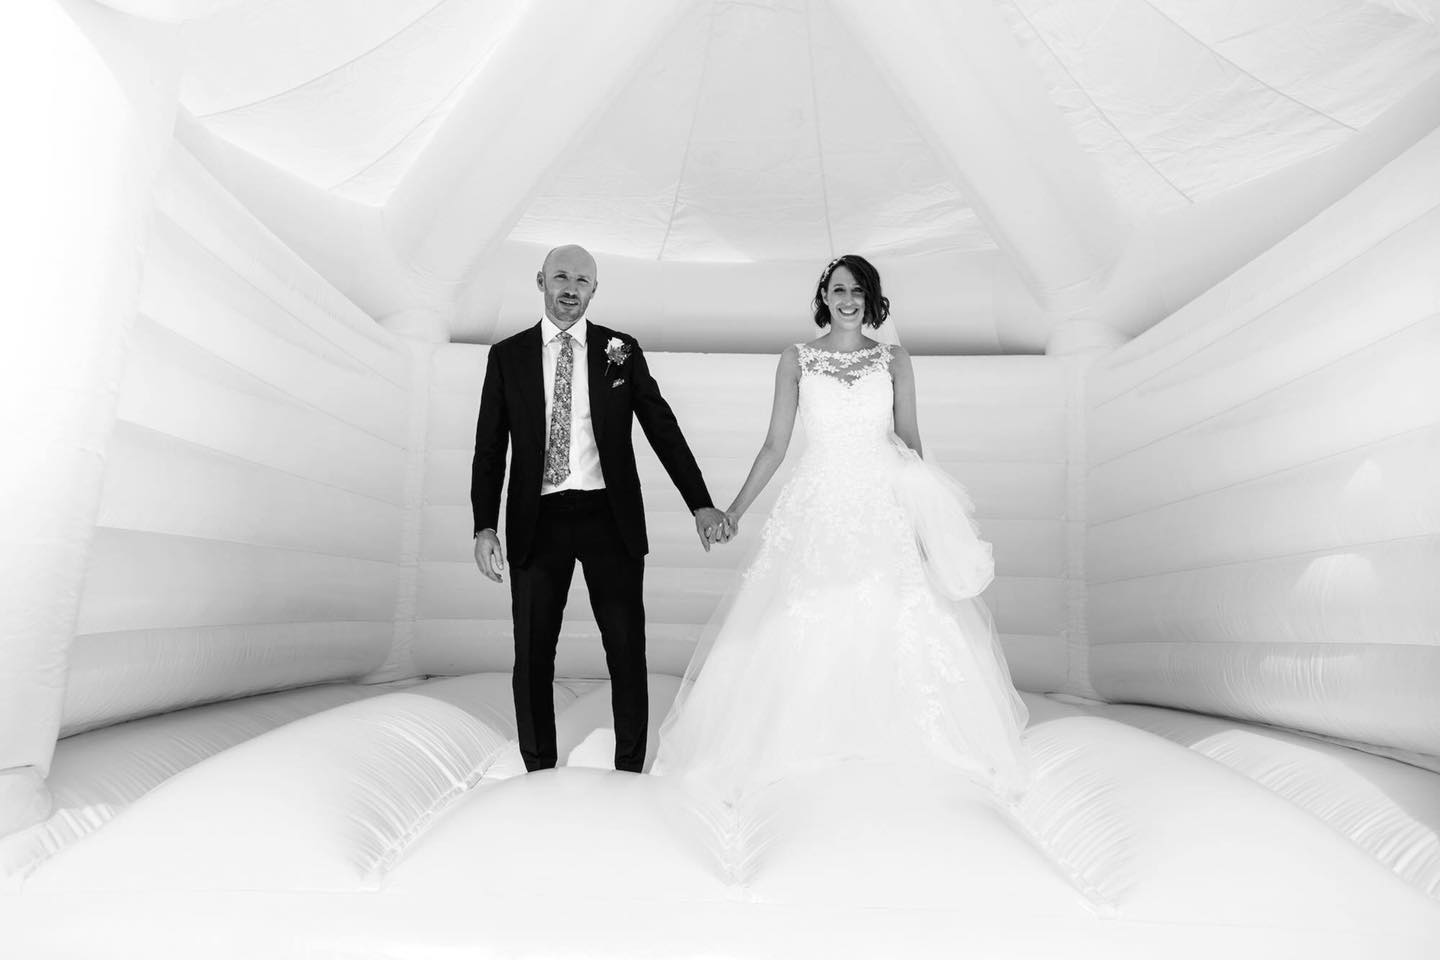 A beautiful image kindly sent in by one of our customers (bride & groom) of our gorgeous mega white carousel bouncy castle on hire for a wedding reception in the North West